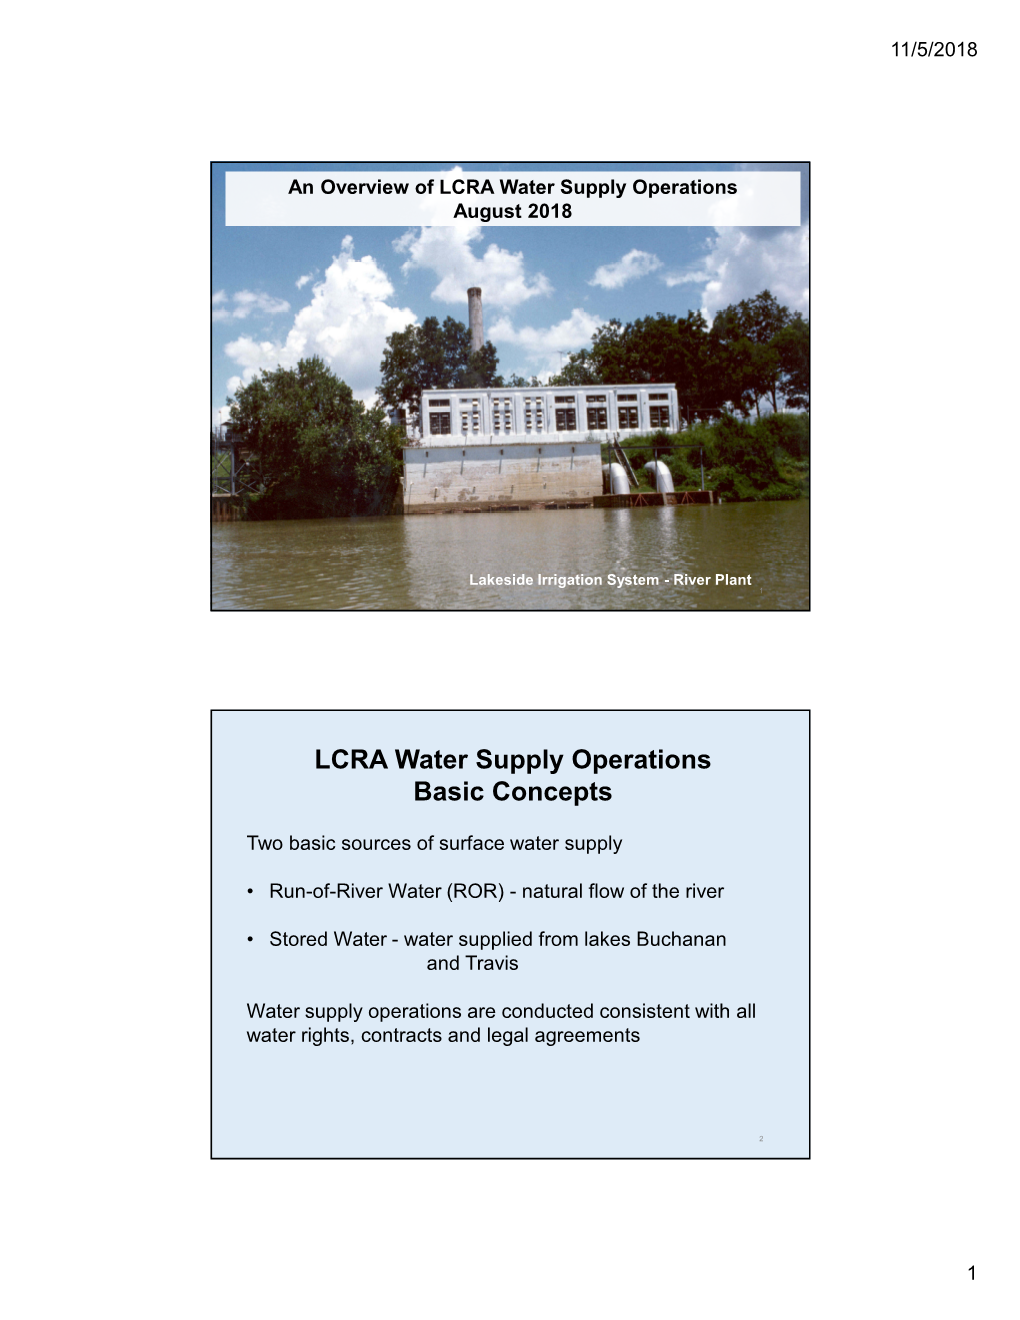 Overview of LCRA Water Supply Operations August 2018